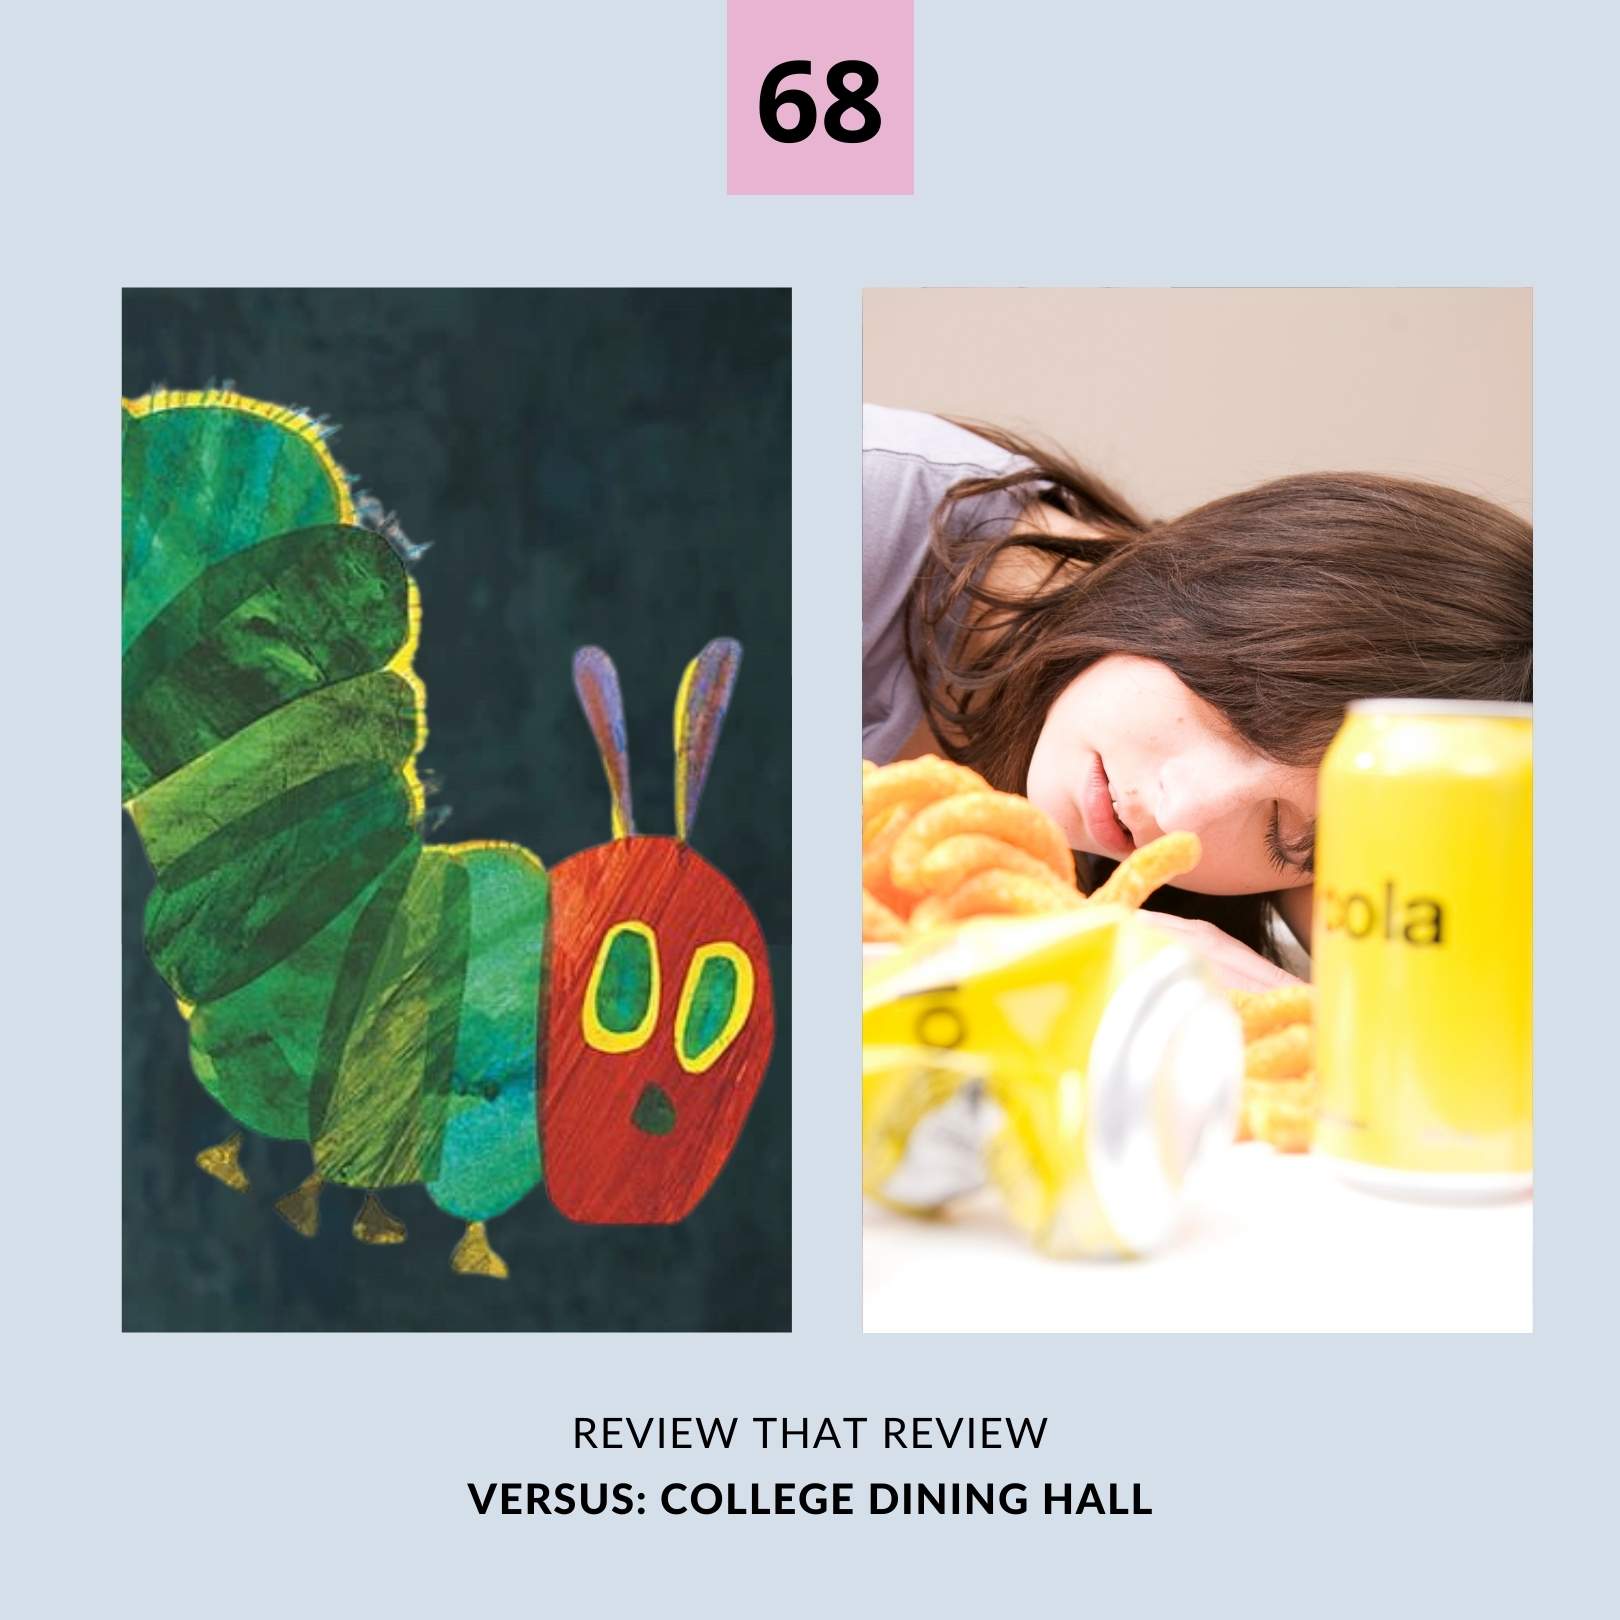 Episode 68: College Dining Hall 1 vs. 5 Stars